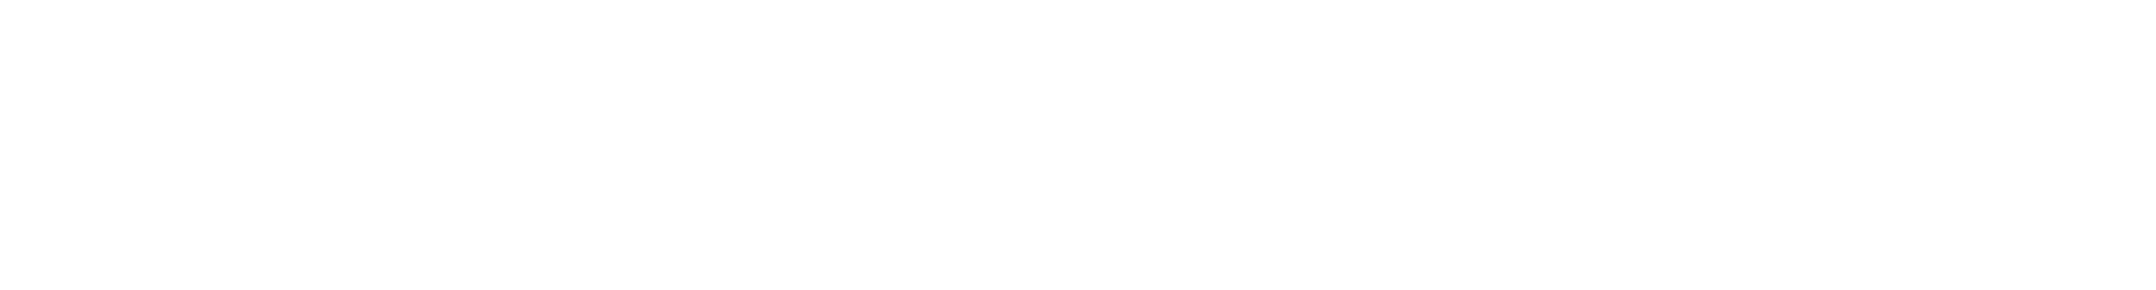 Holiday Golf Ball Offers